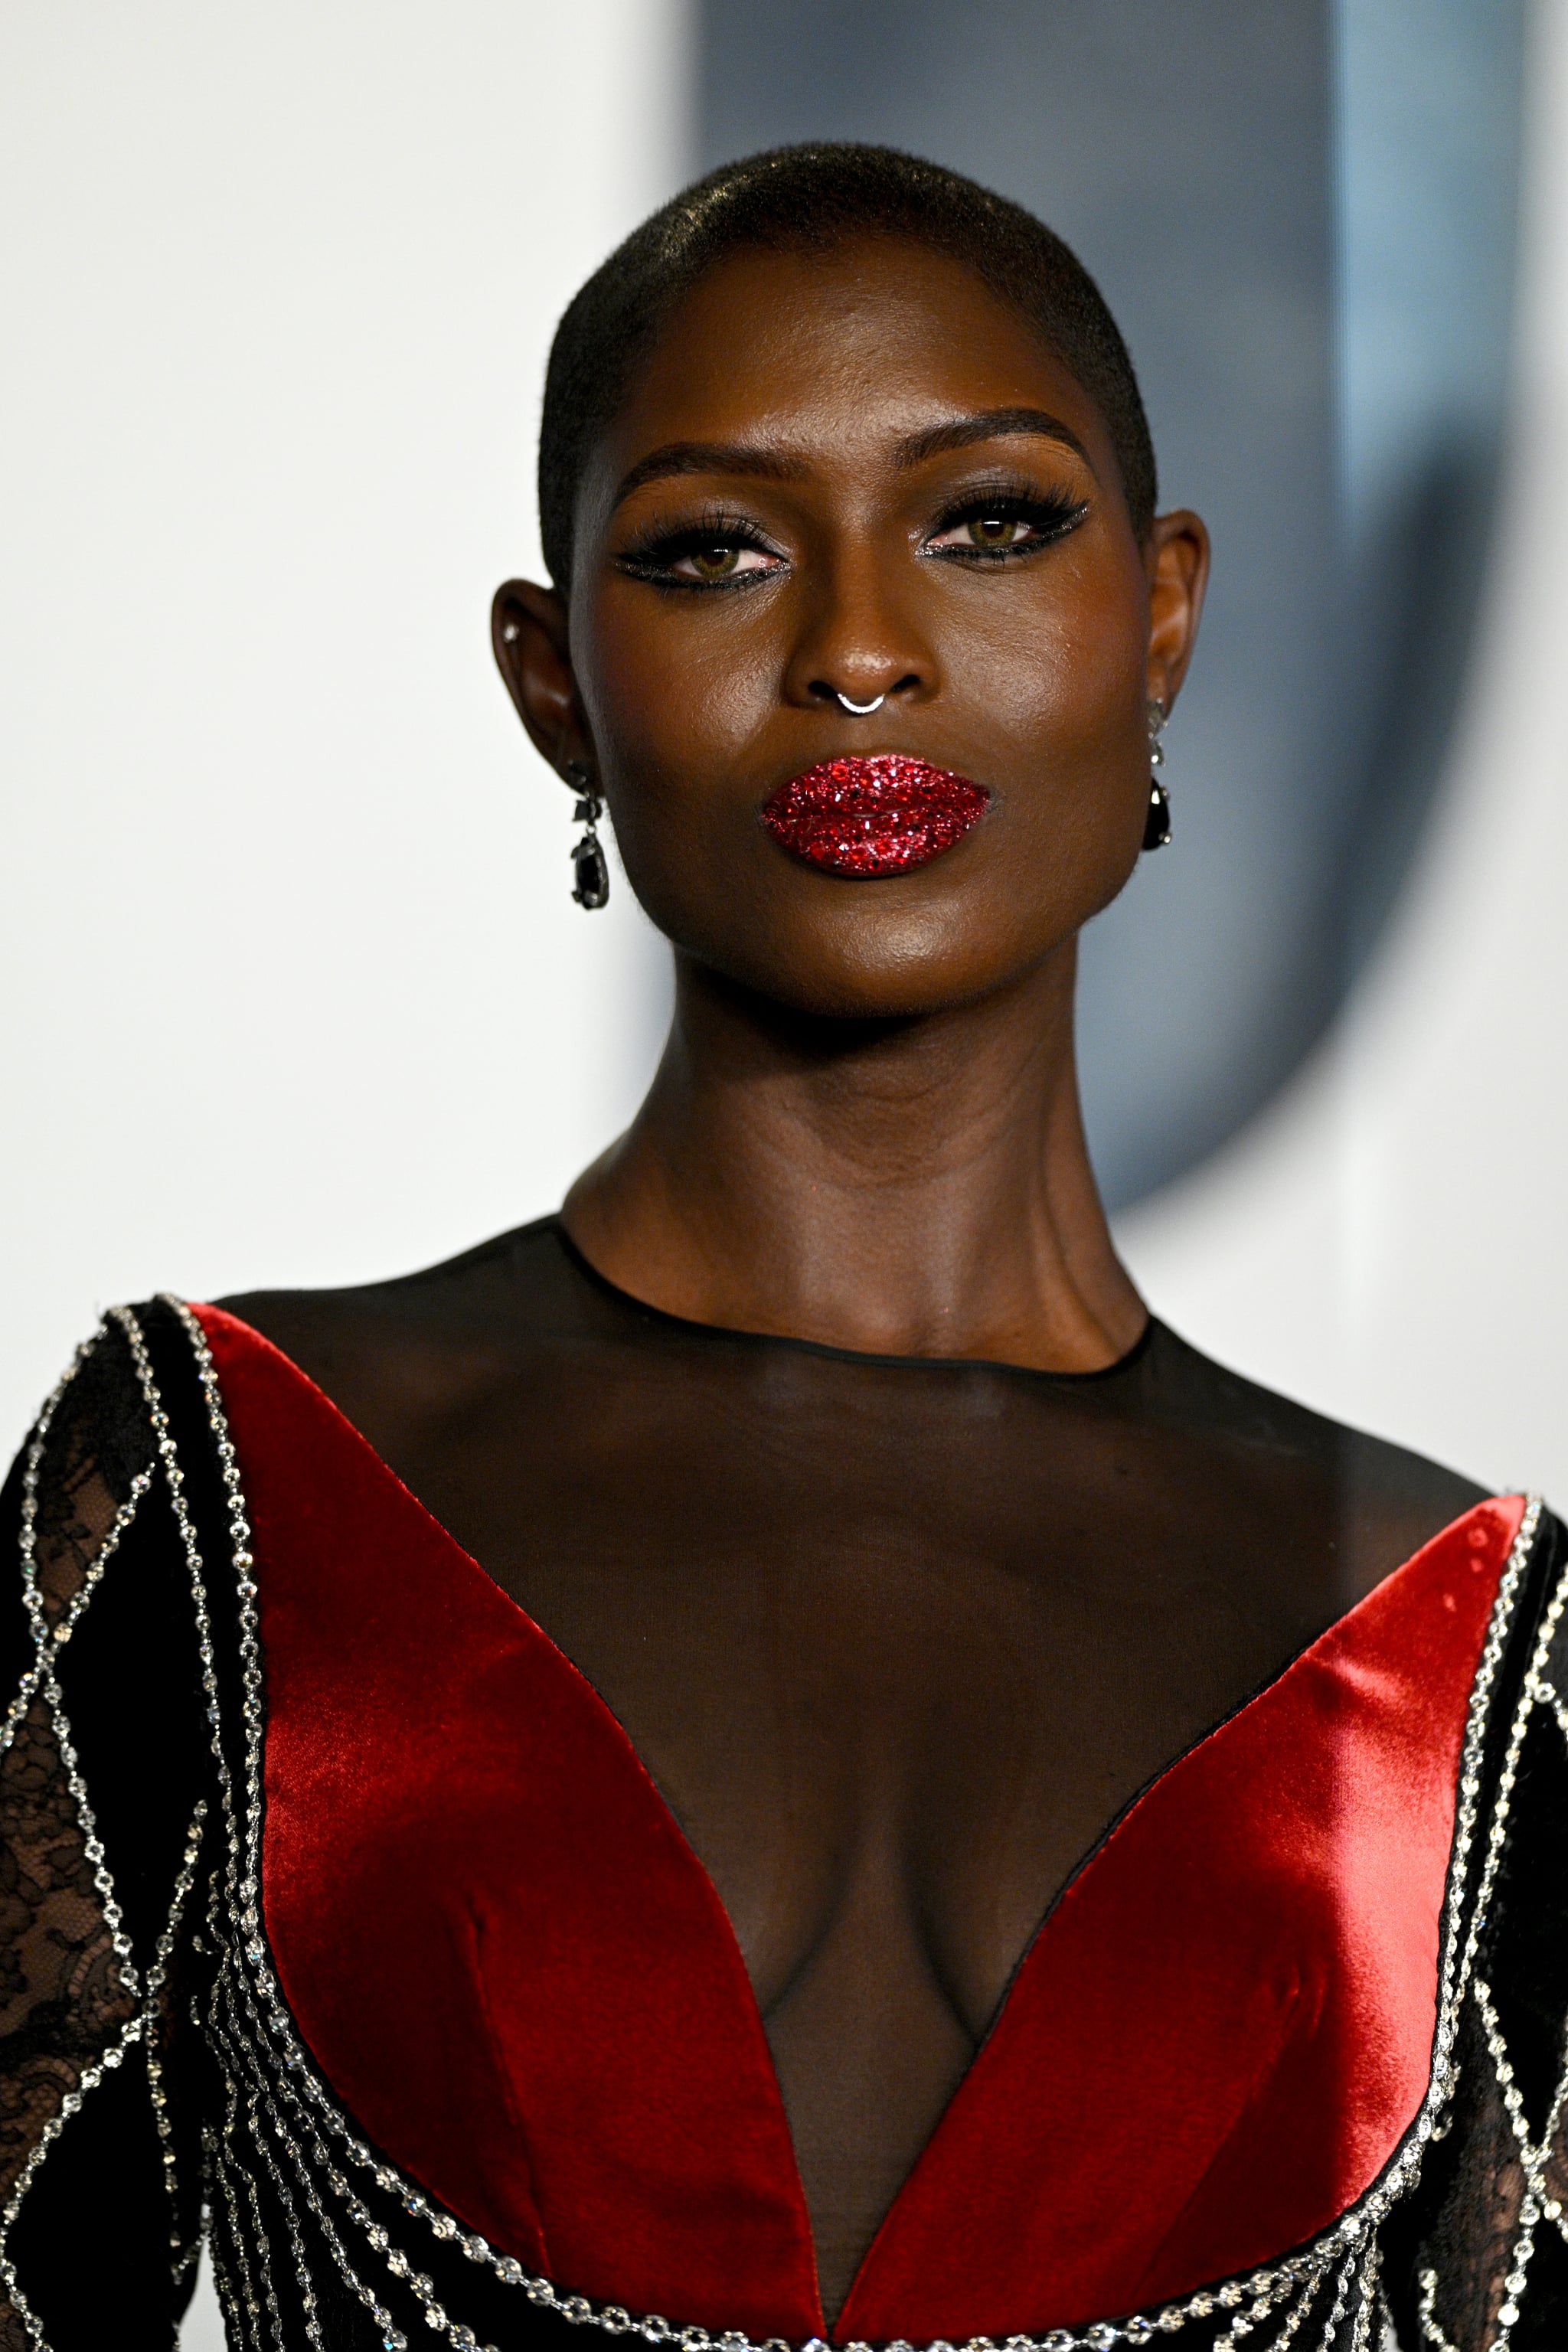 BEVERLY HILLS, CALIFORNIA - MARCH 12: Jodie Turner-Smith attends the 2023 Vanity Fair Oscar Party Hosted By Radhika Jones at Wallis Annenberg Centre for the Performing Arts on March 12, 2023 in Beverly Hills, California. (Photo by Lionel Hahn/Getty Images)